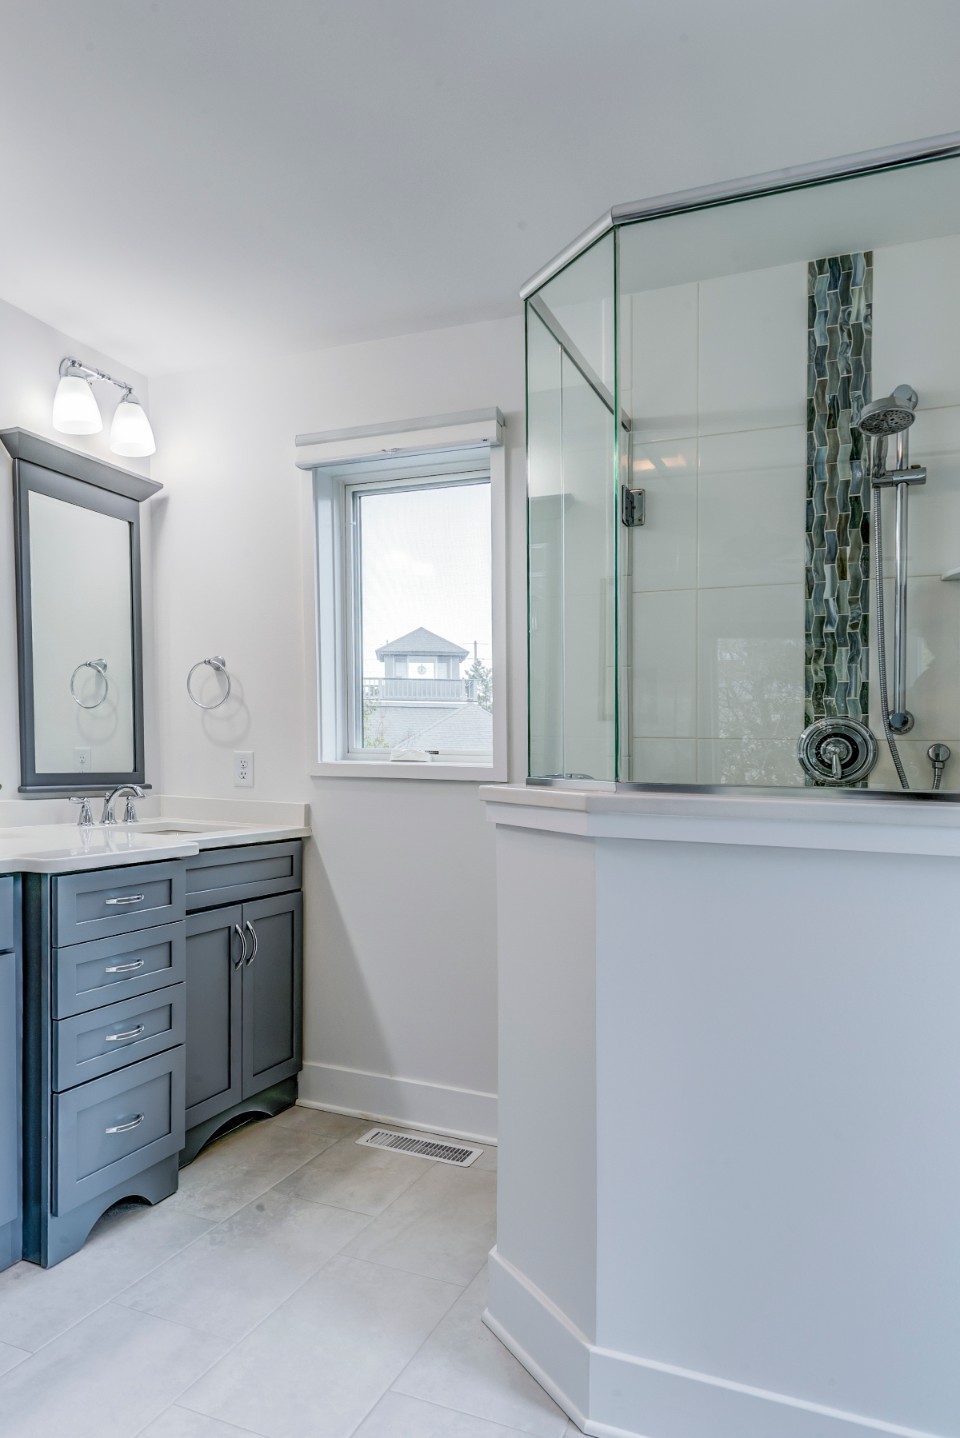 Cotton Patch Hills Renovation in Bethany Beach DE - Bathroom with Shower Glass Upper Half Walls